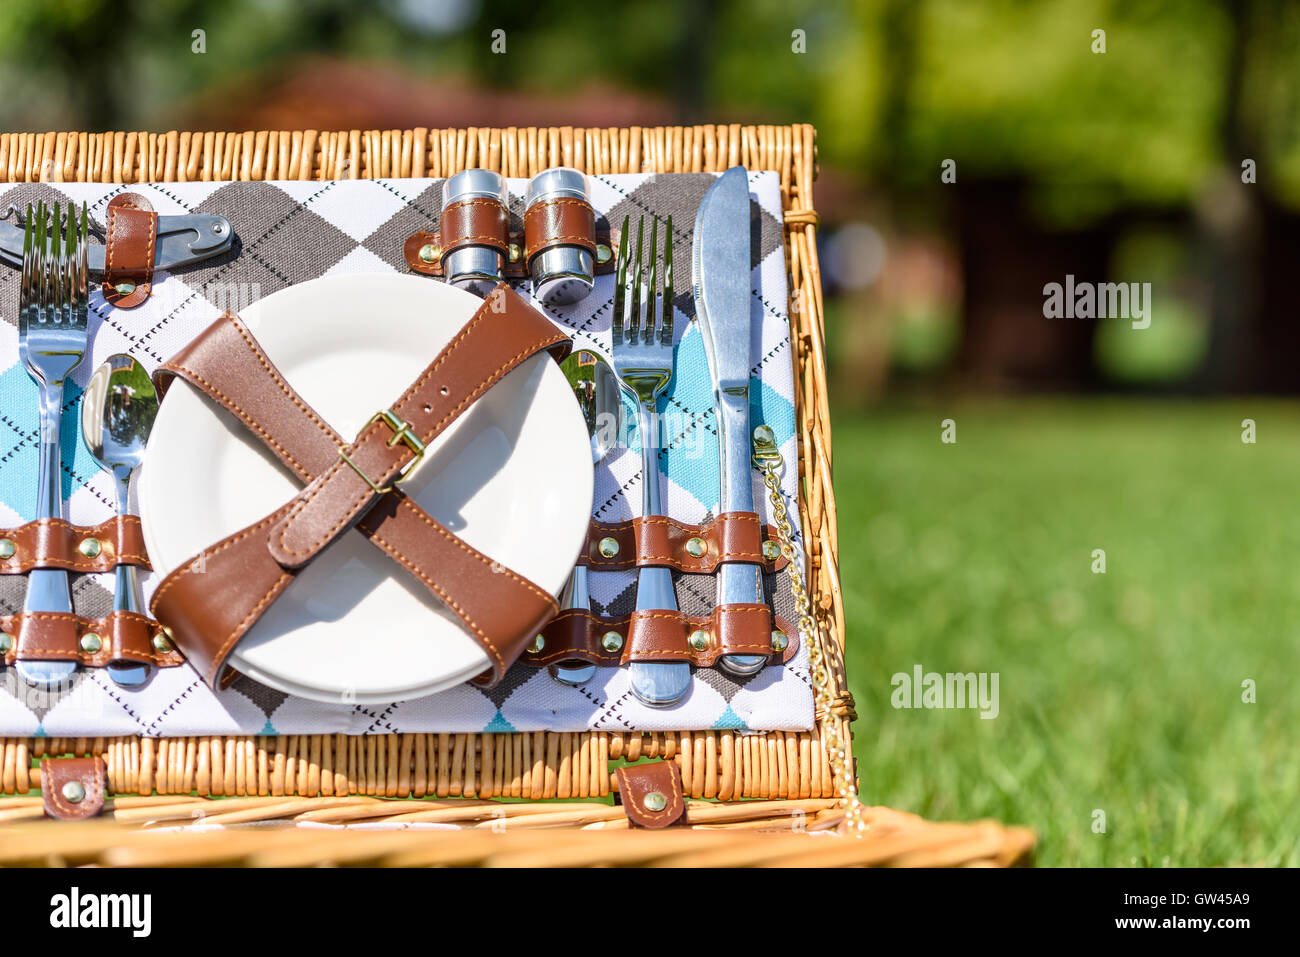 Opened Picnic Basket With Cutlery In Spring Green Grass Stock Photo